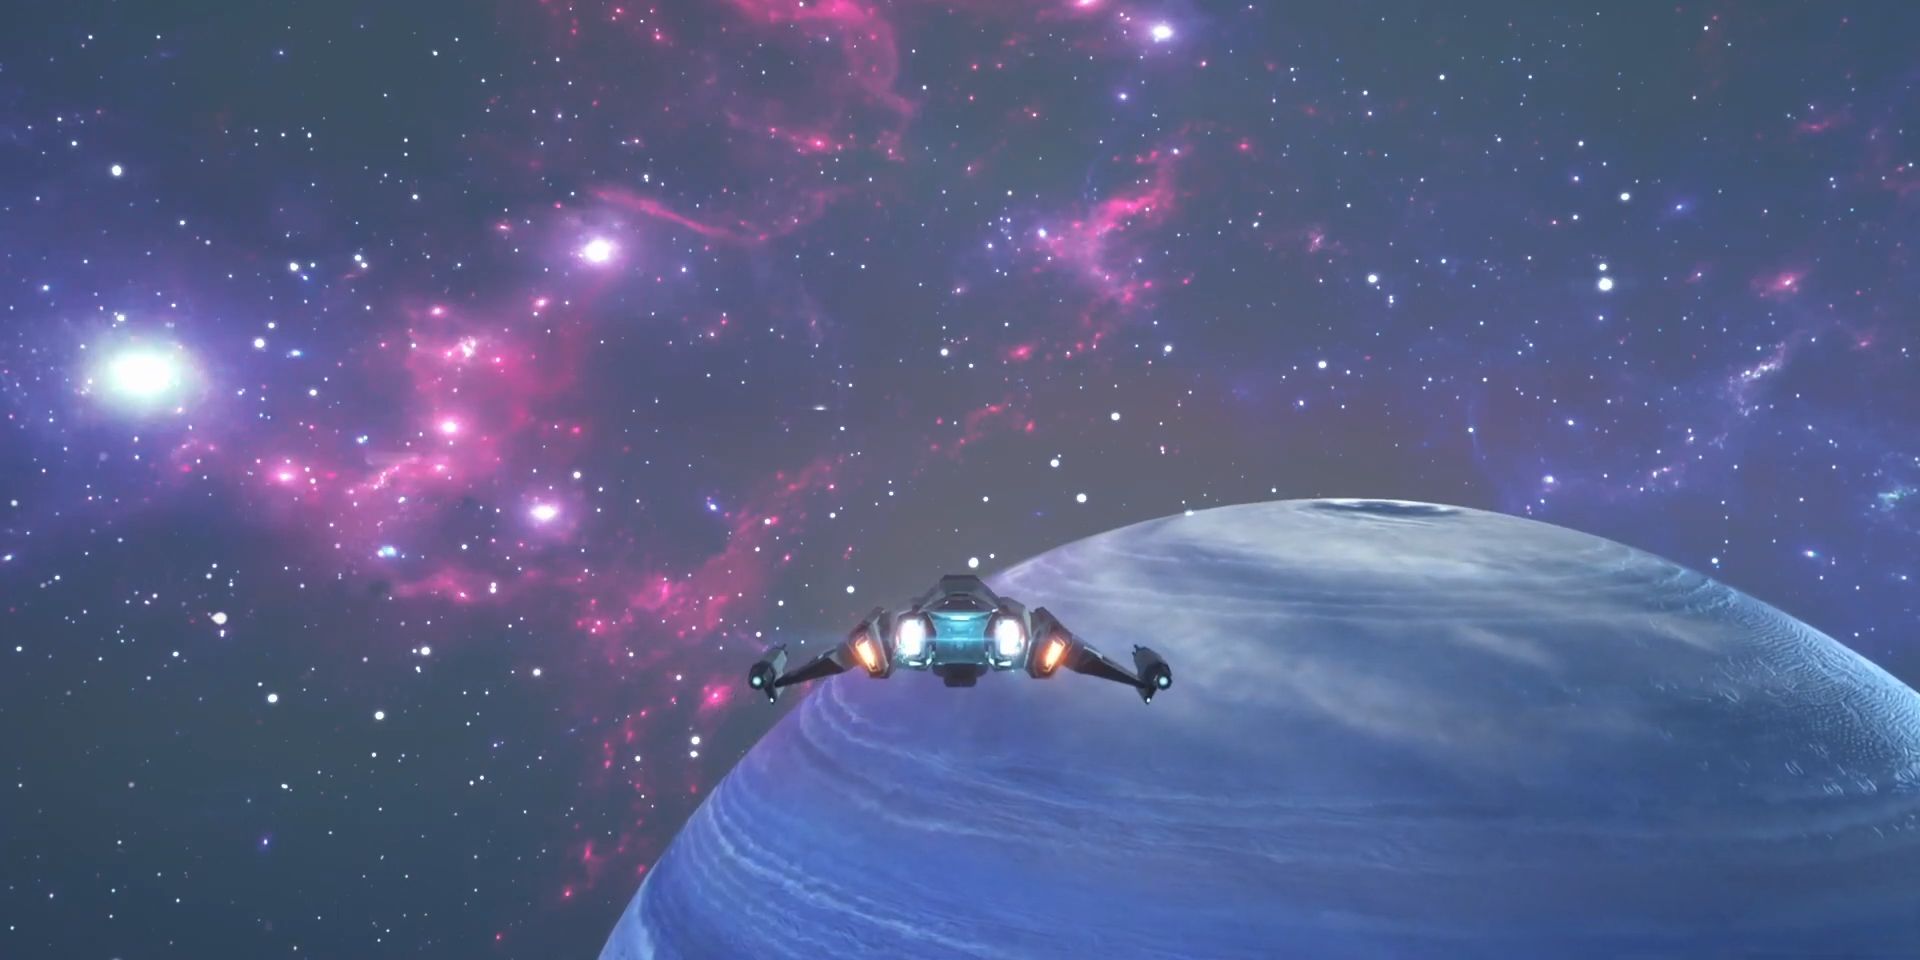 FF7 Rebirth - A small ship flies alongside a blue planet in a screenshot from the Galactic Saviors minigame.